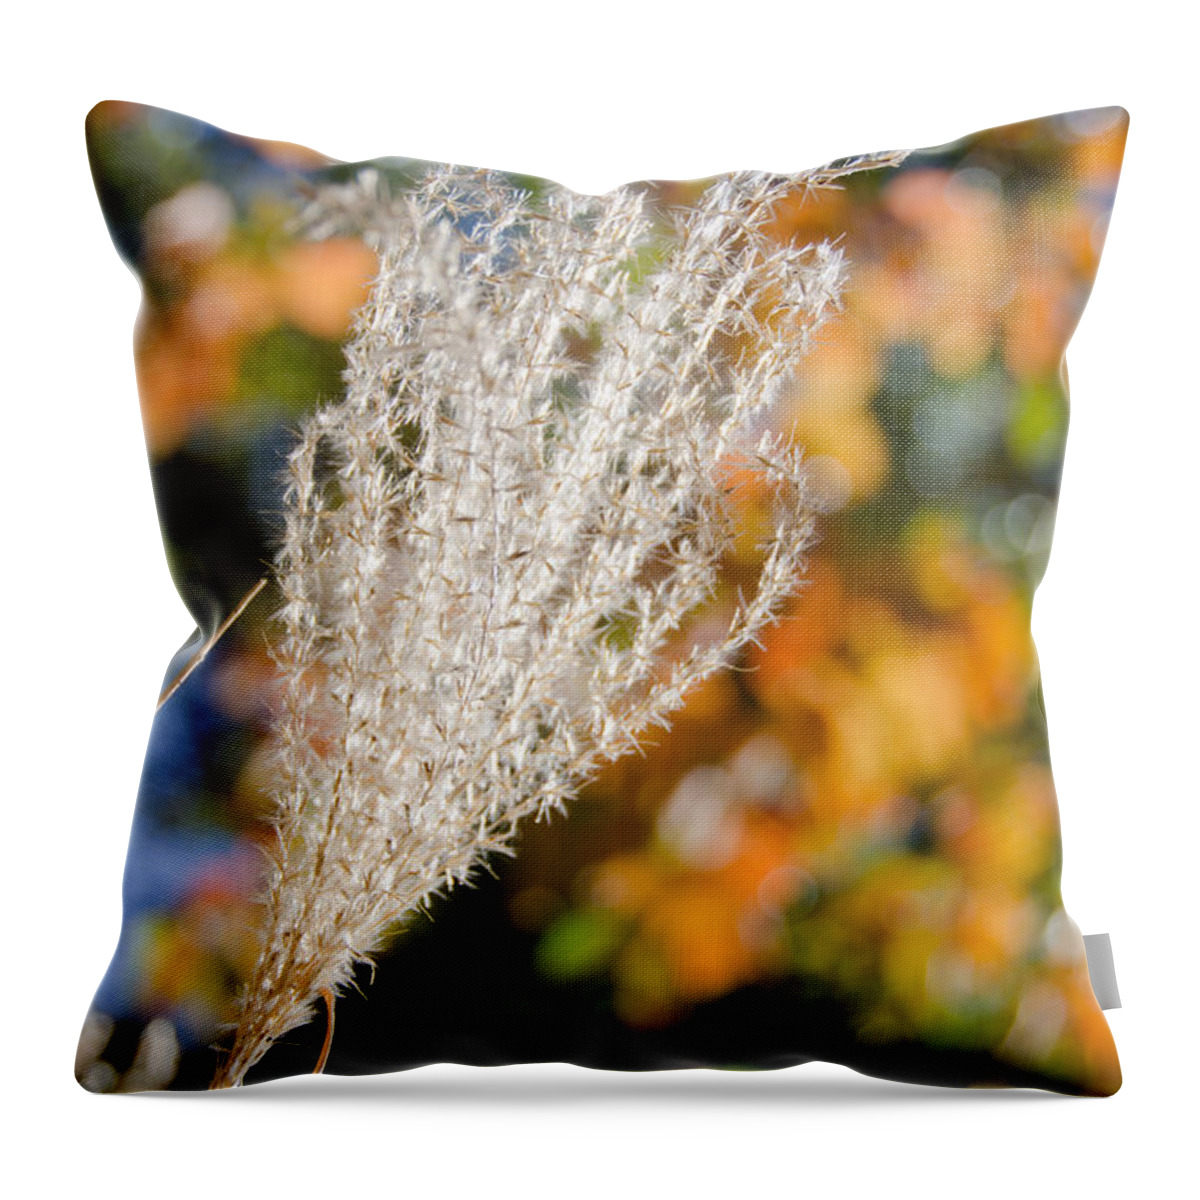 Fuzzy Throw Pillow featuring the photograph Fuzzy Grass 4 by Cassie Marie Photography